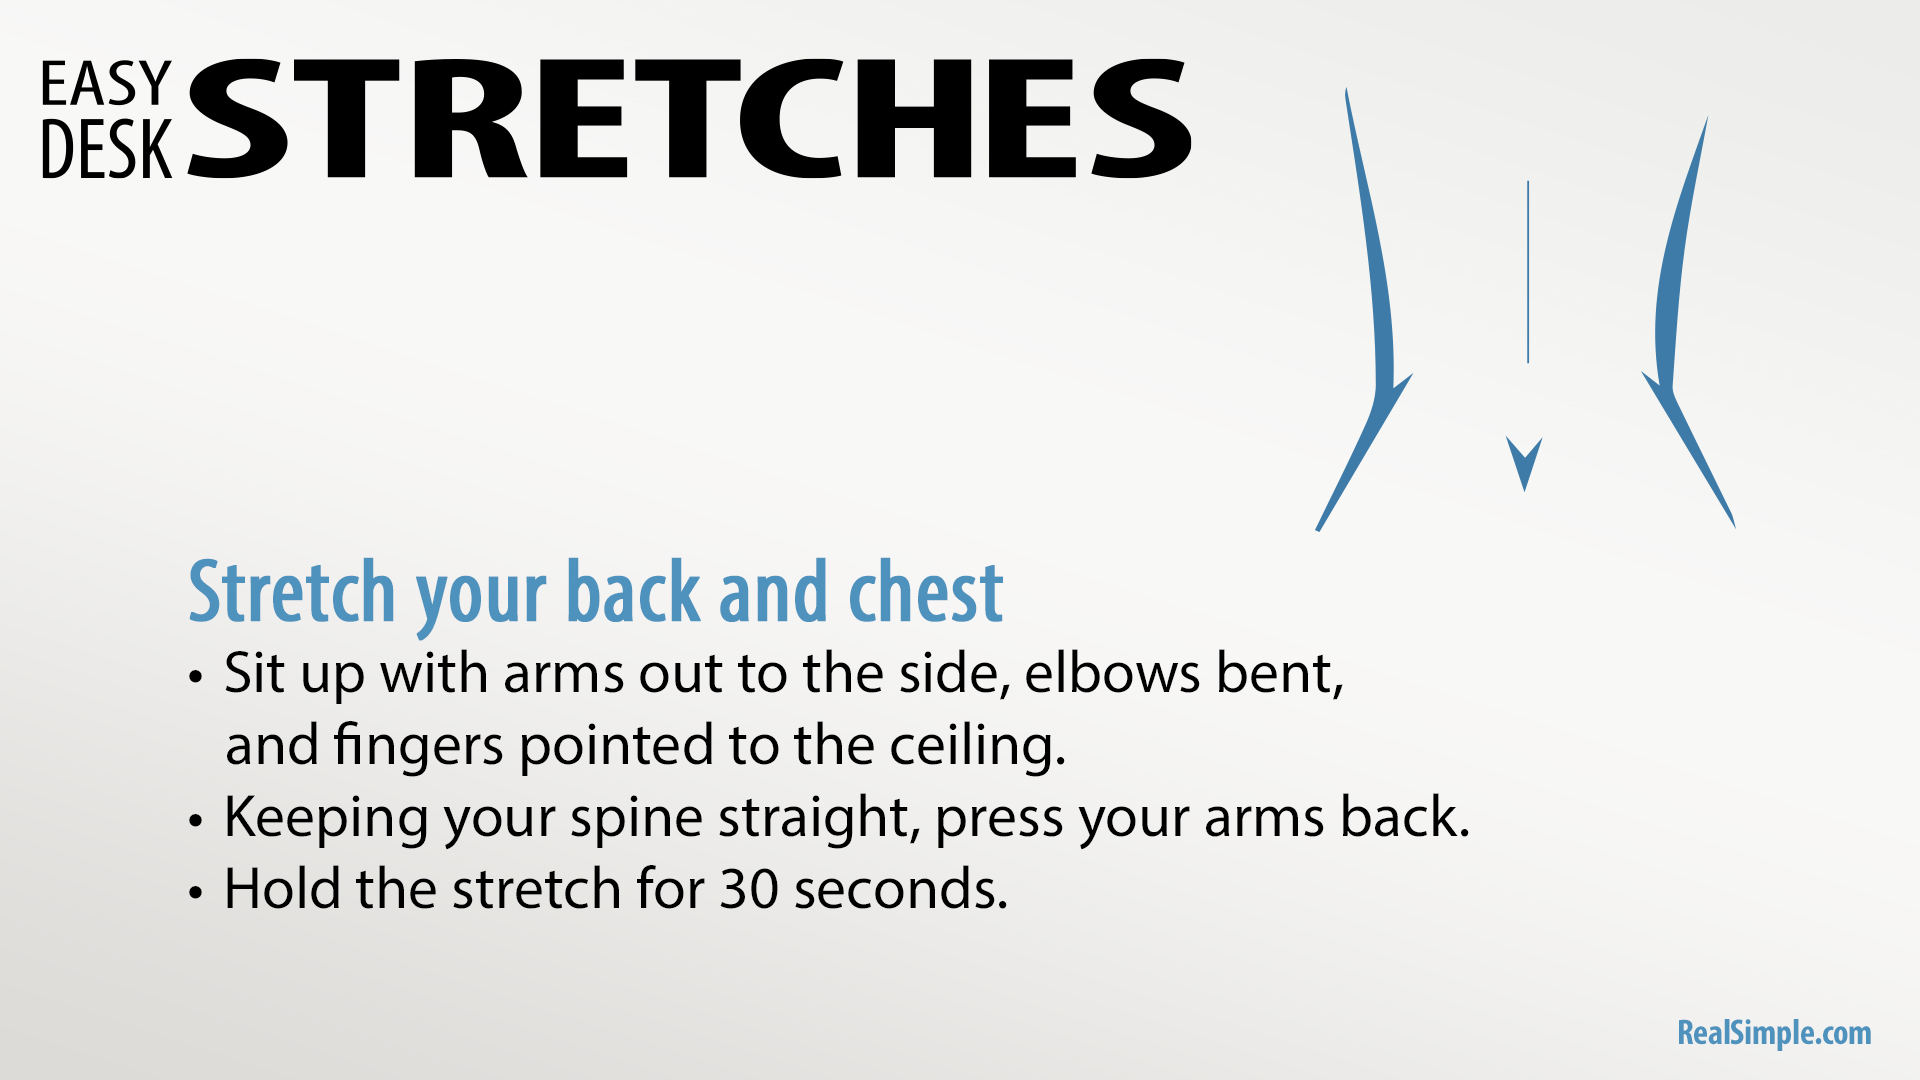 Free Graphic | Easy Desk Stretches | Stretch Your Back & Chest